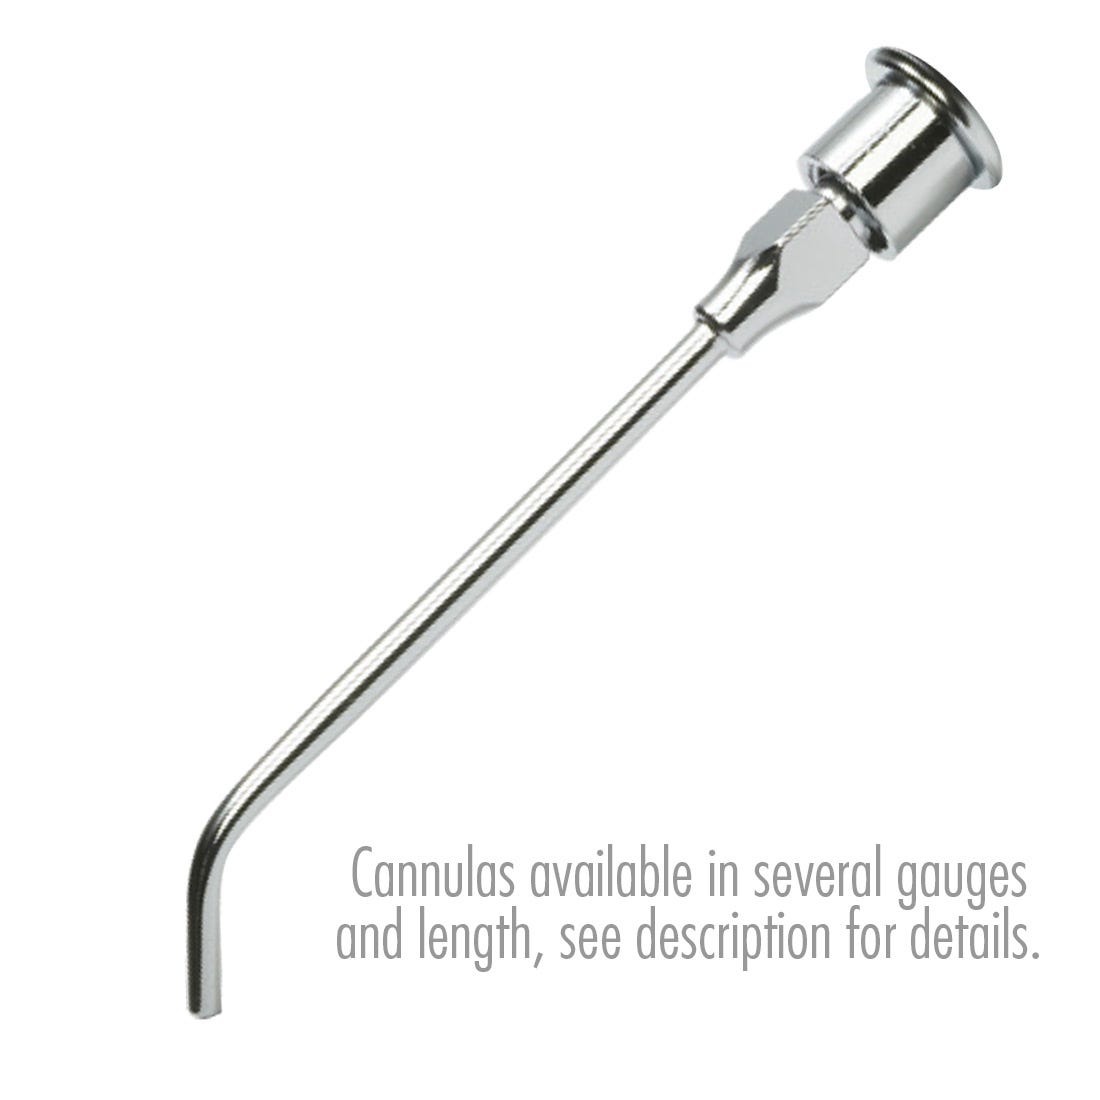 ACE Irrigation Cannula - Stainless Steel 22G x 2", 45 degree angle